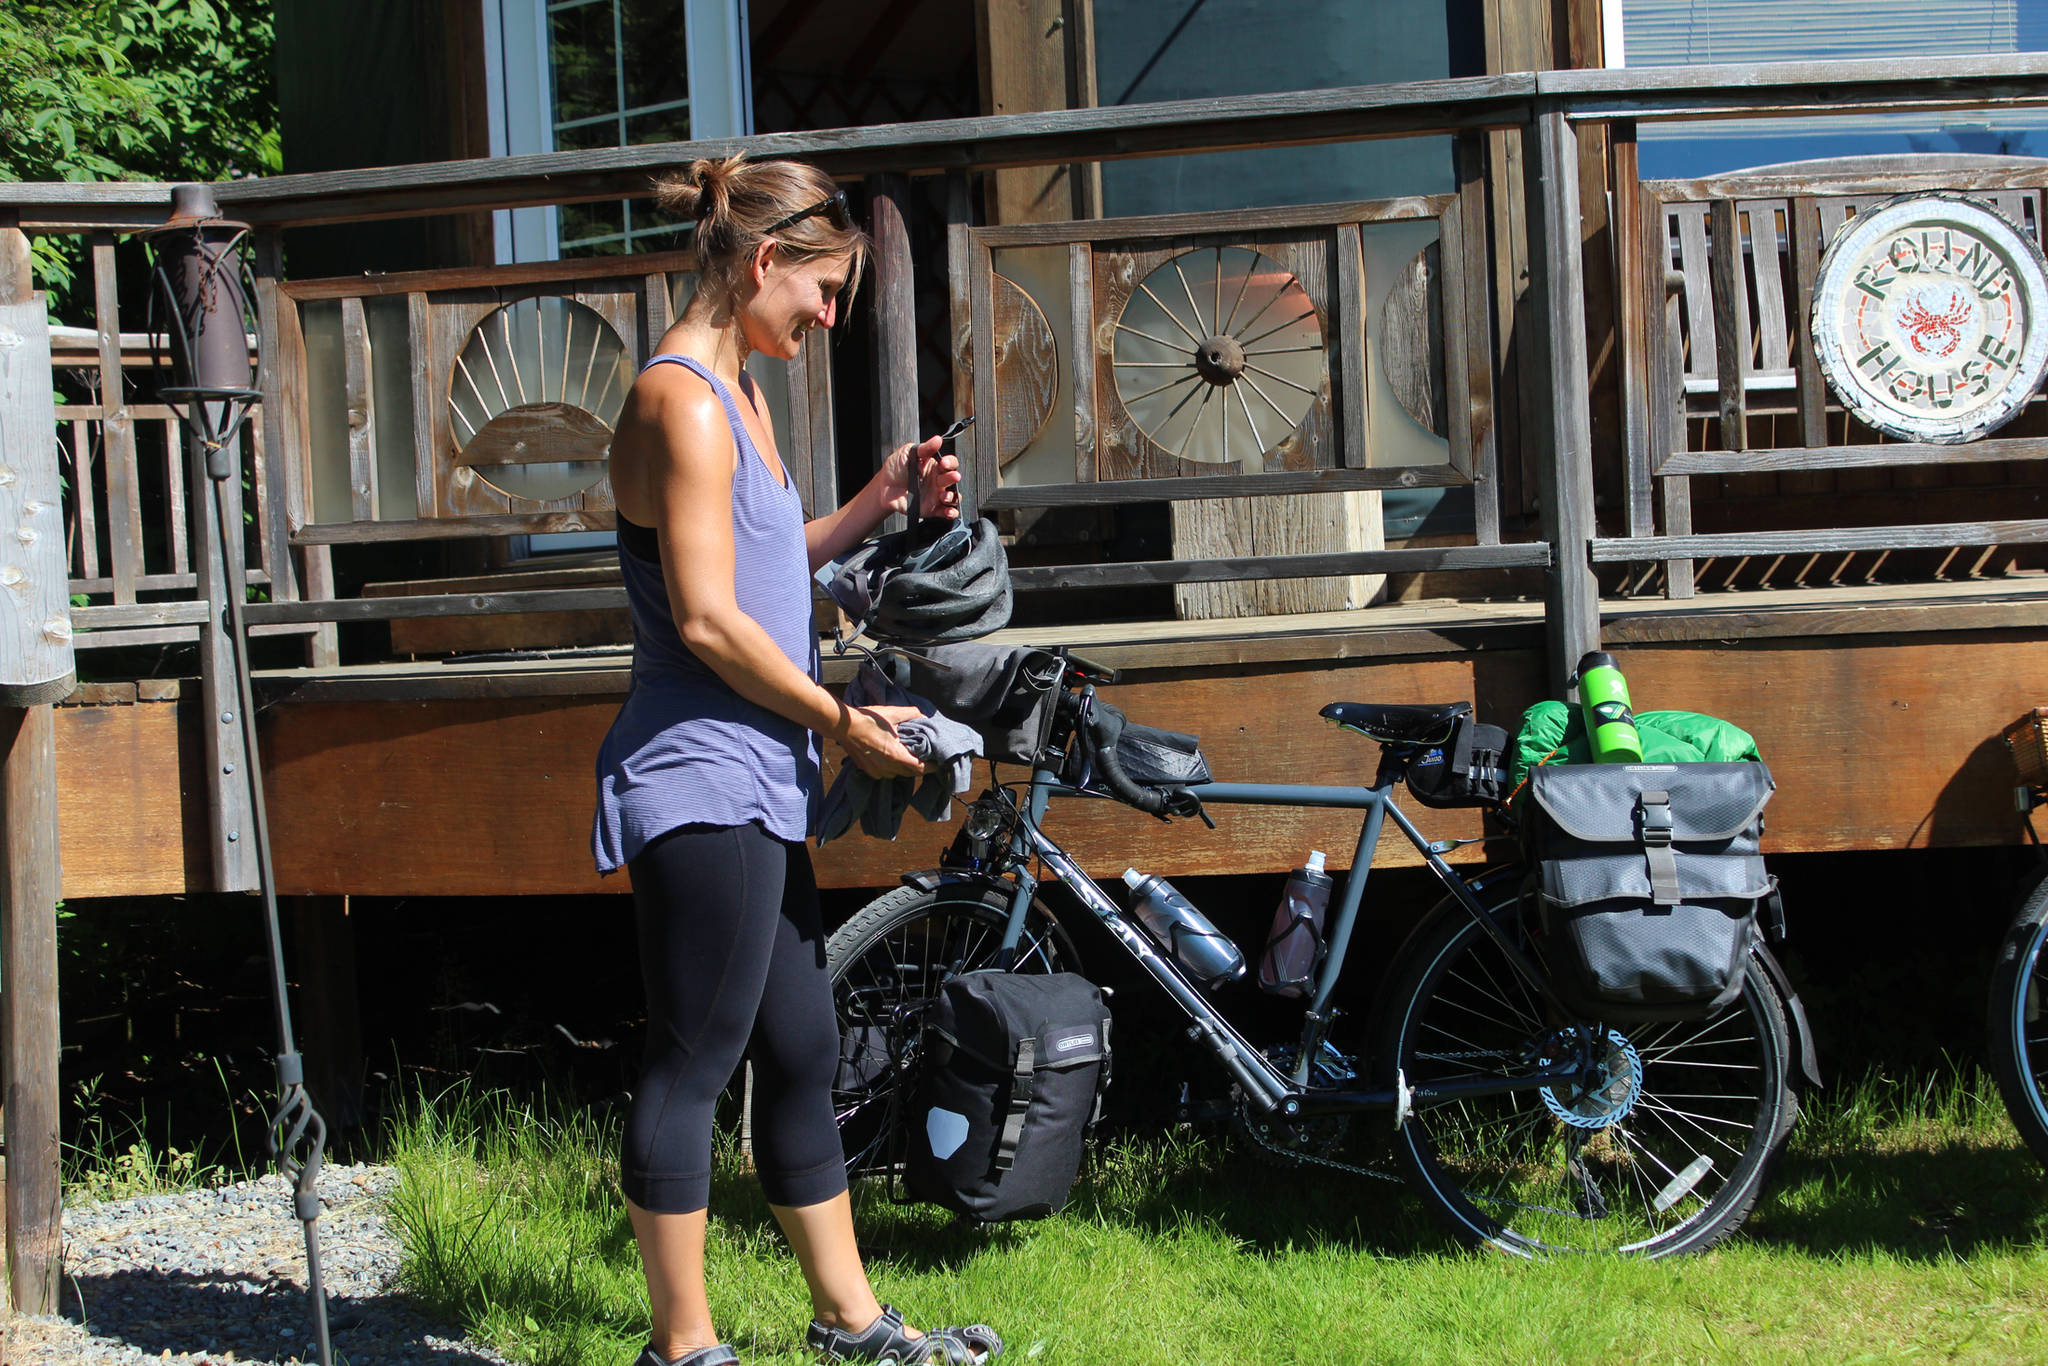 Sophie George prepares to mount her bicycle for a trip from Alaska to Argentina with her husband, Chris Haag, on Monday, July 2, 2018 in Homer, Alaska. The pair set off from a yurt they rented on Hidden Way. (Photo by Megan Pacer/Homer News)